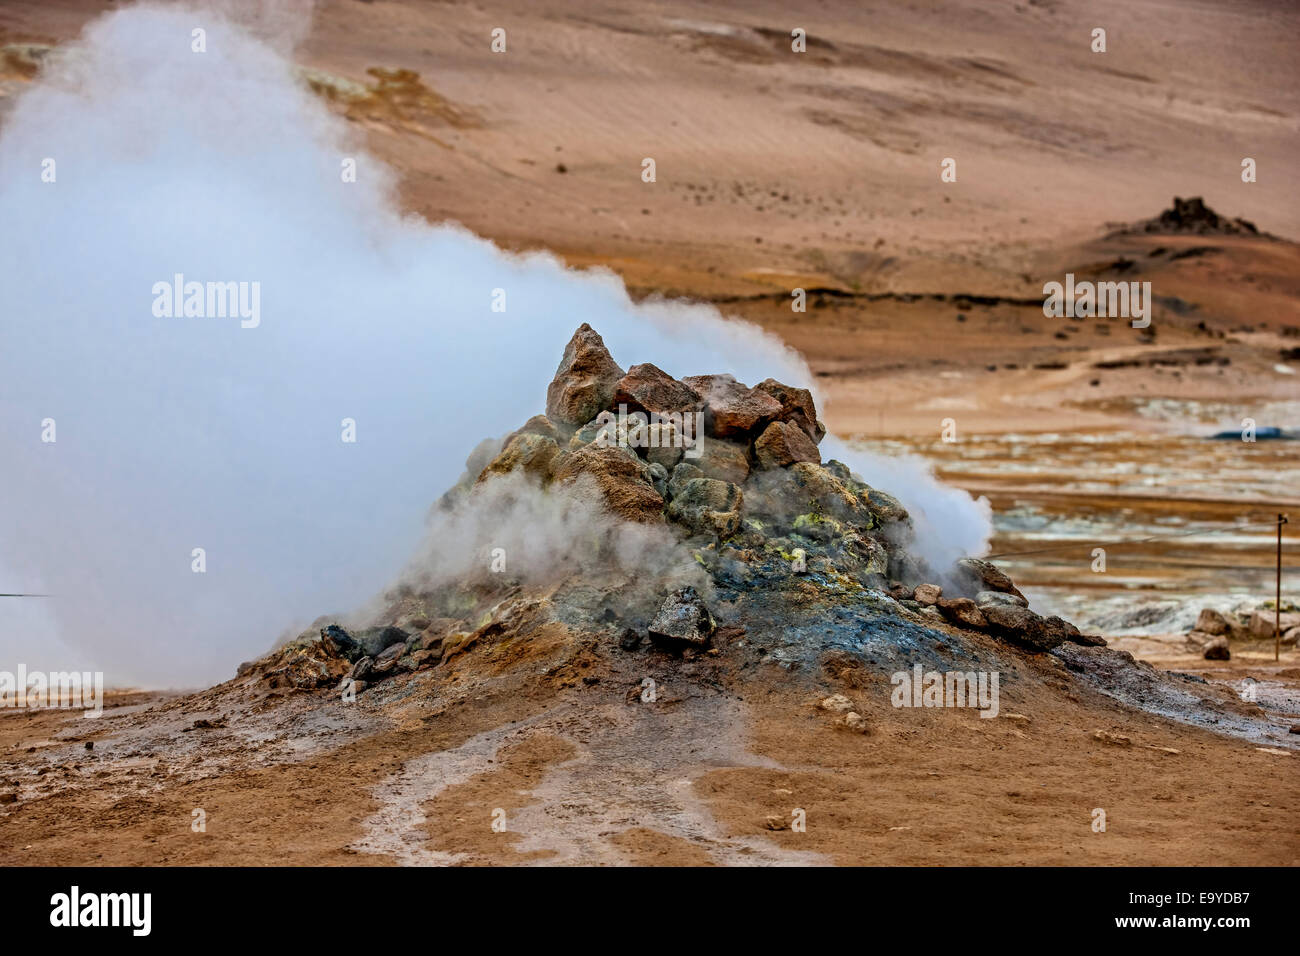 Fumarole evacuating pressurized hot sulfurous gases from volcanic activity in the geothermal area of Hverir Iceland near Lake My Stock Photo